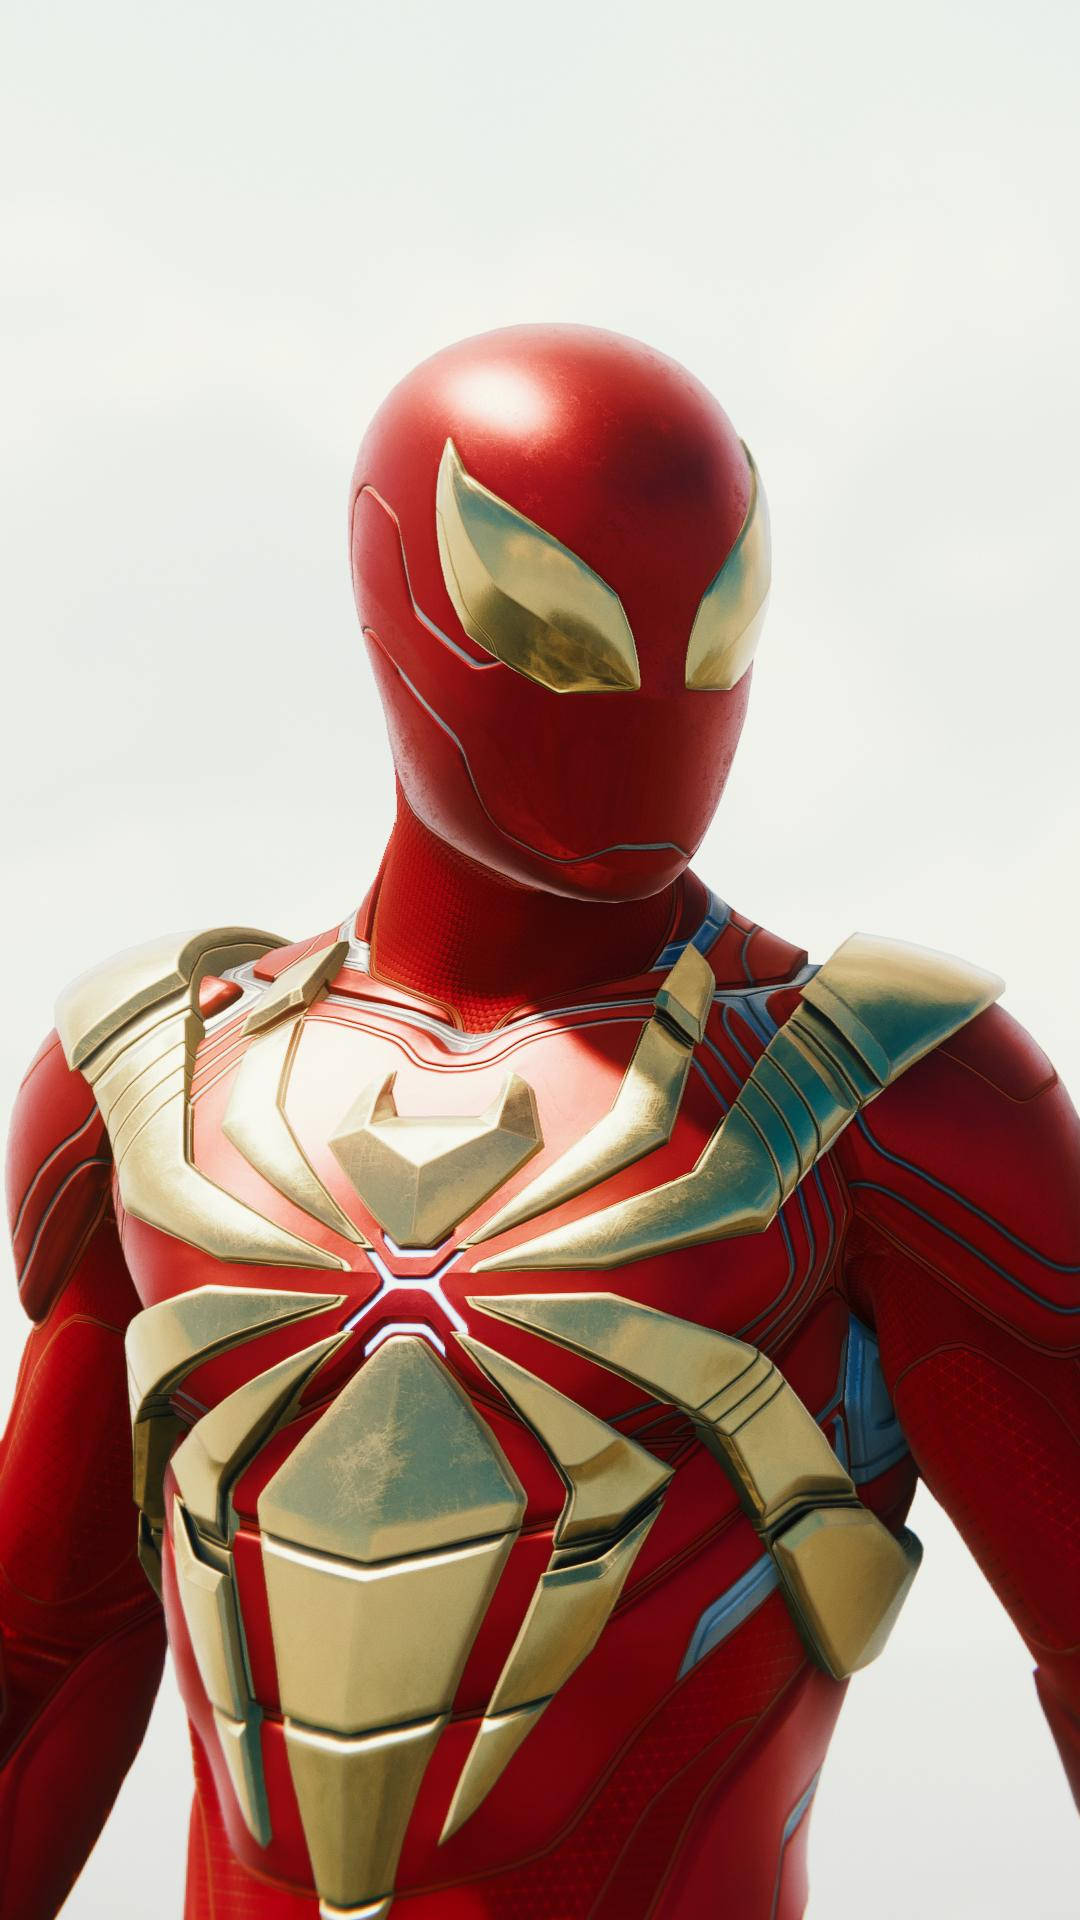 Spiderman Glossy Iron Spider Gold Armor Background